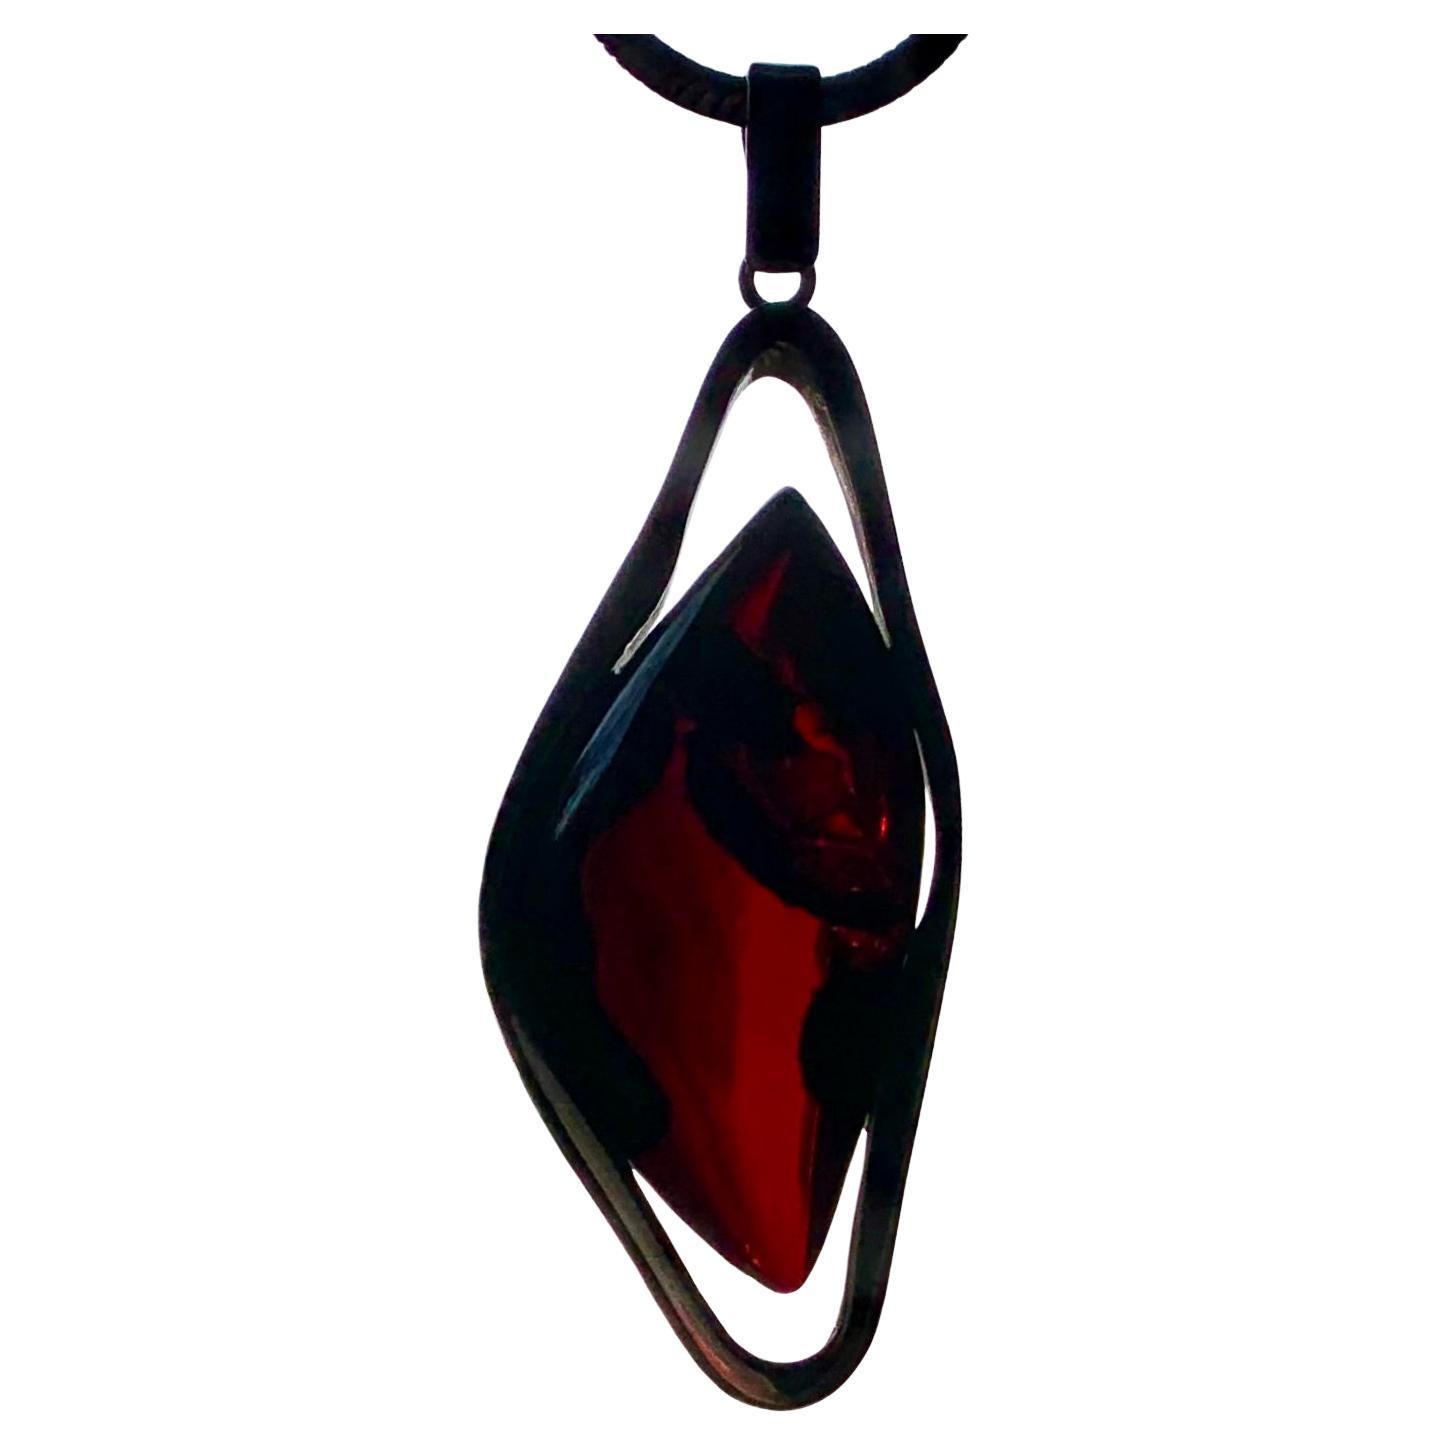 Striking, large Scandinavian Modernist natural transluscent madiera amber and substantial sterling silver pendant necklace
20th Century
This piece feels more like an art object with its heavy sculptural sterling silver setting enclosing a superb